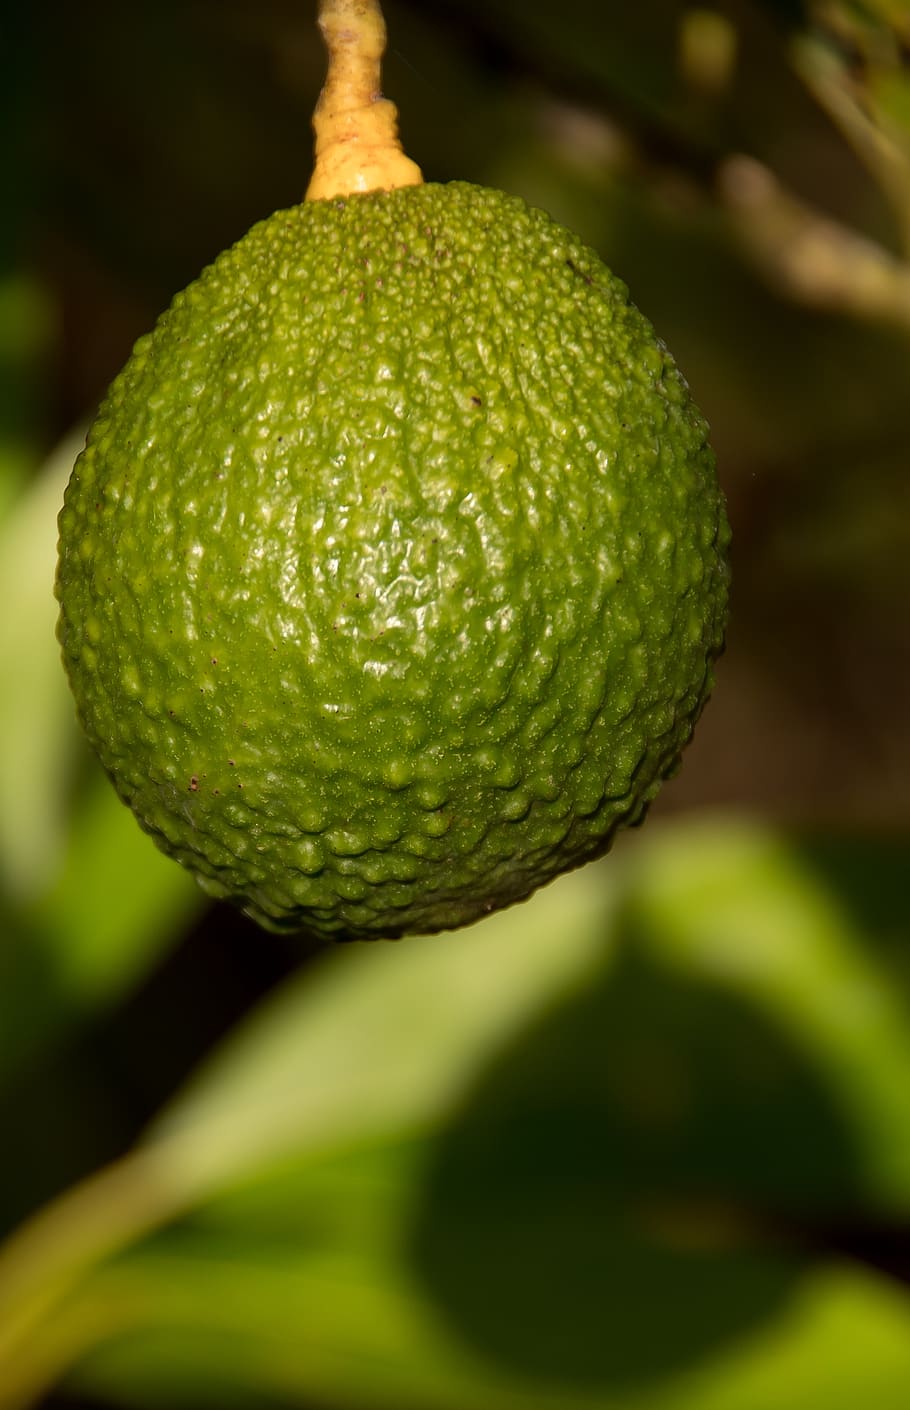 hass avocado, tree, avocados, hass, health, fruit, green, growing, close-up, freshness